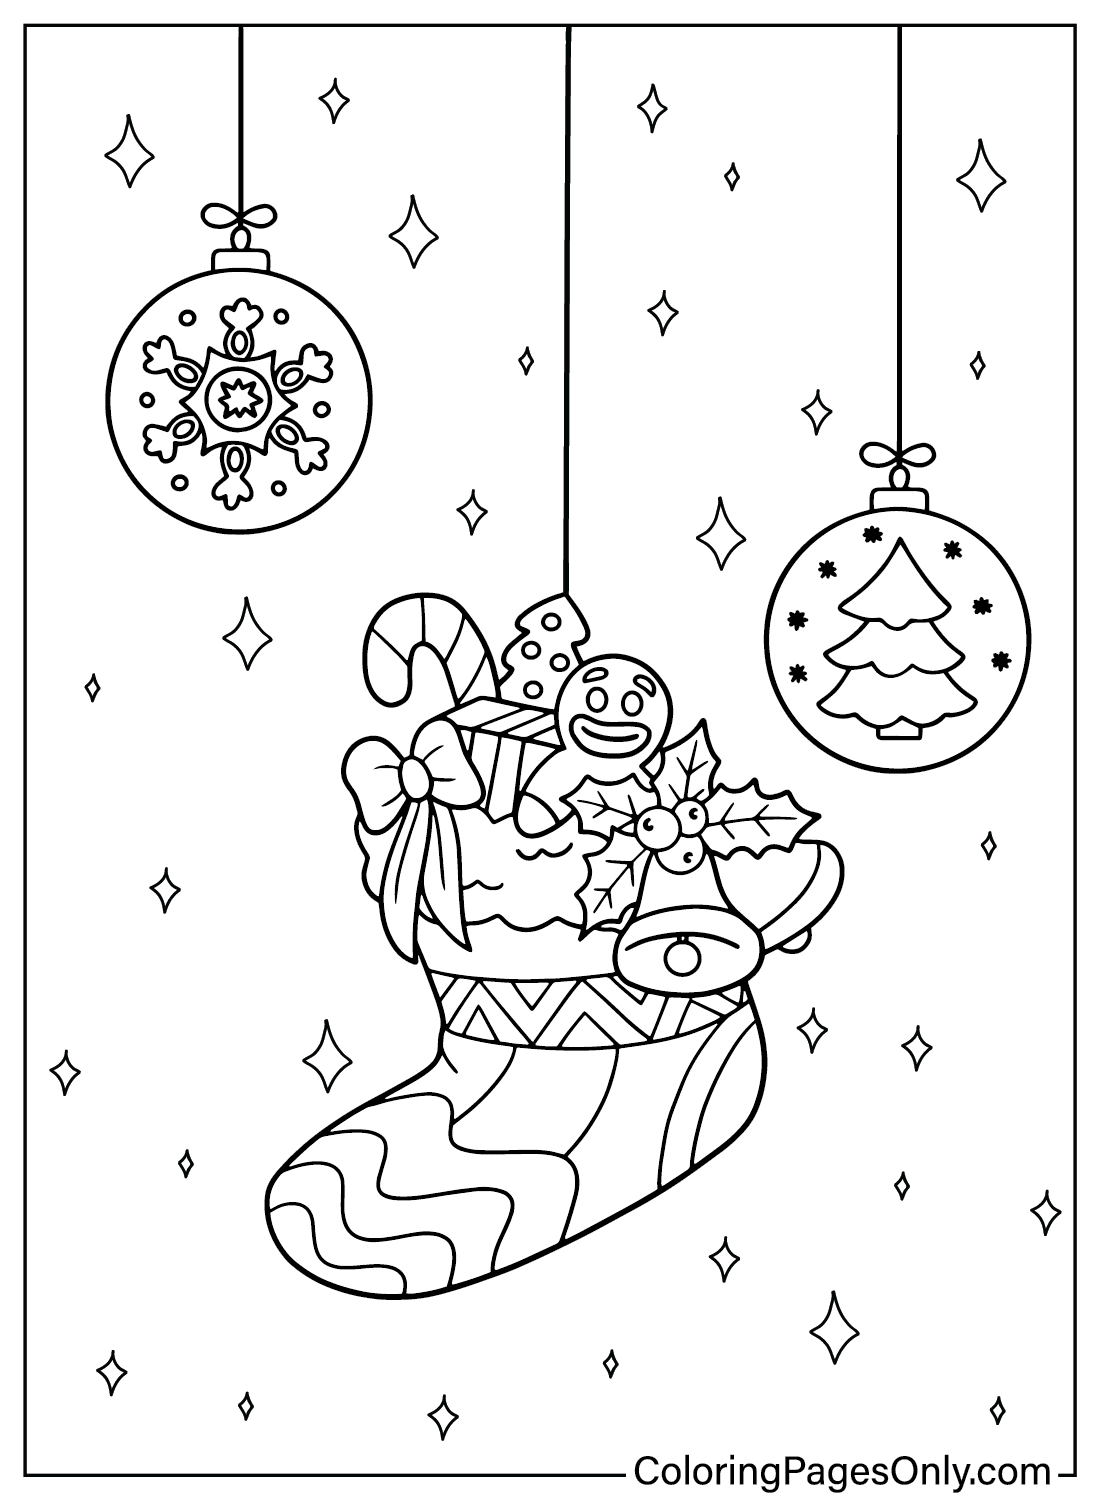 Coloring Page Christmas Stockings from Christmas Stockings